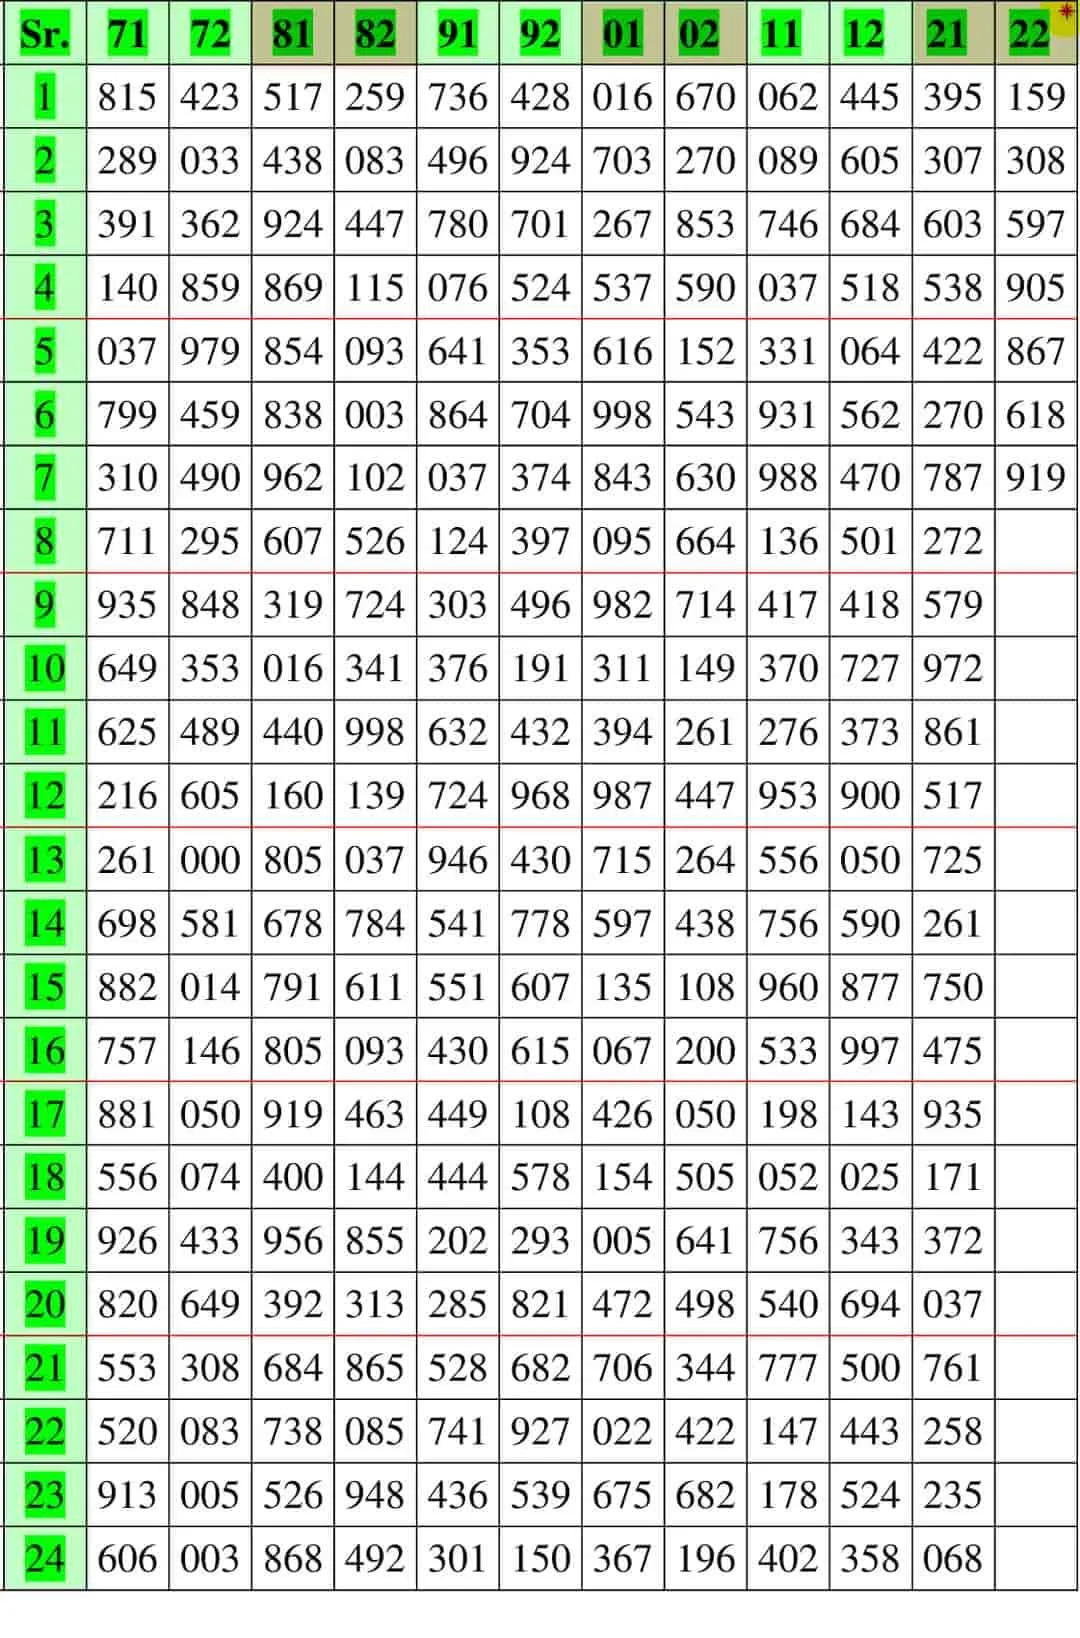 3Up Thailand Lottery result chart  2-5-2022 : Thai lottery 3Up result chart 02/05/2022